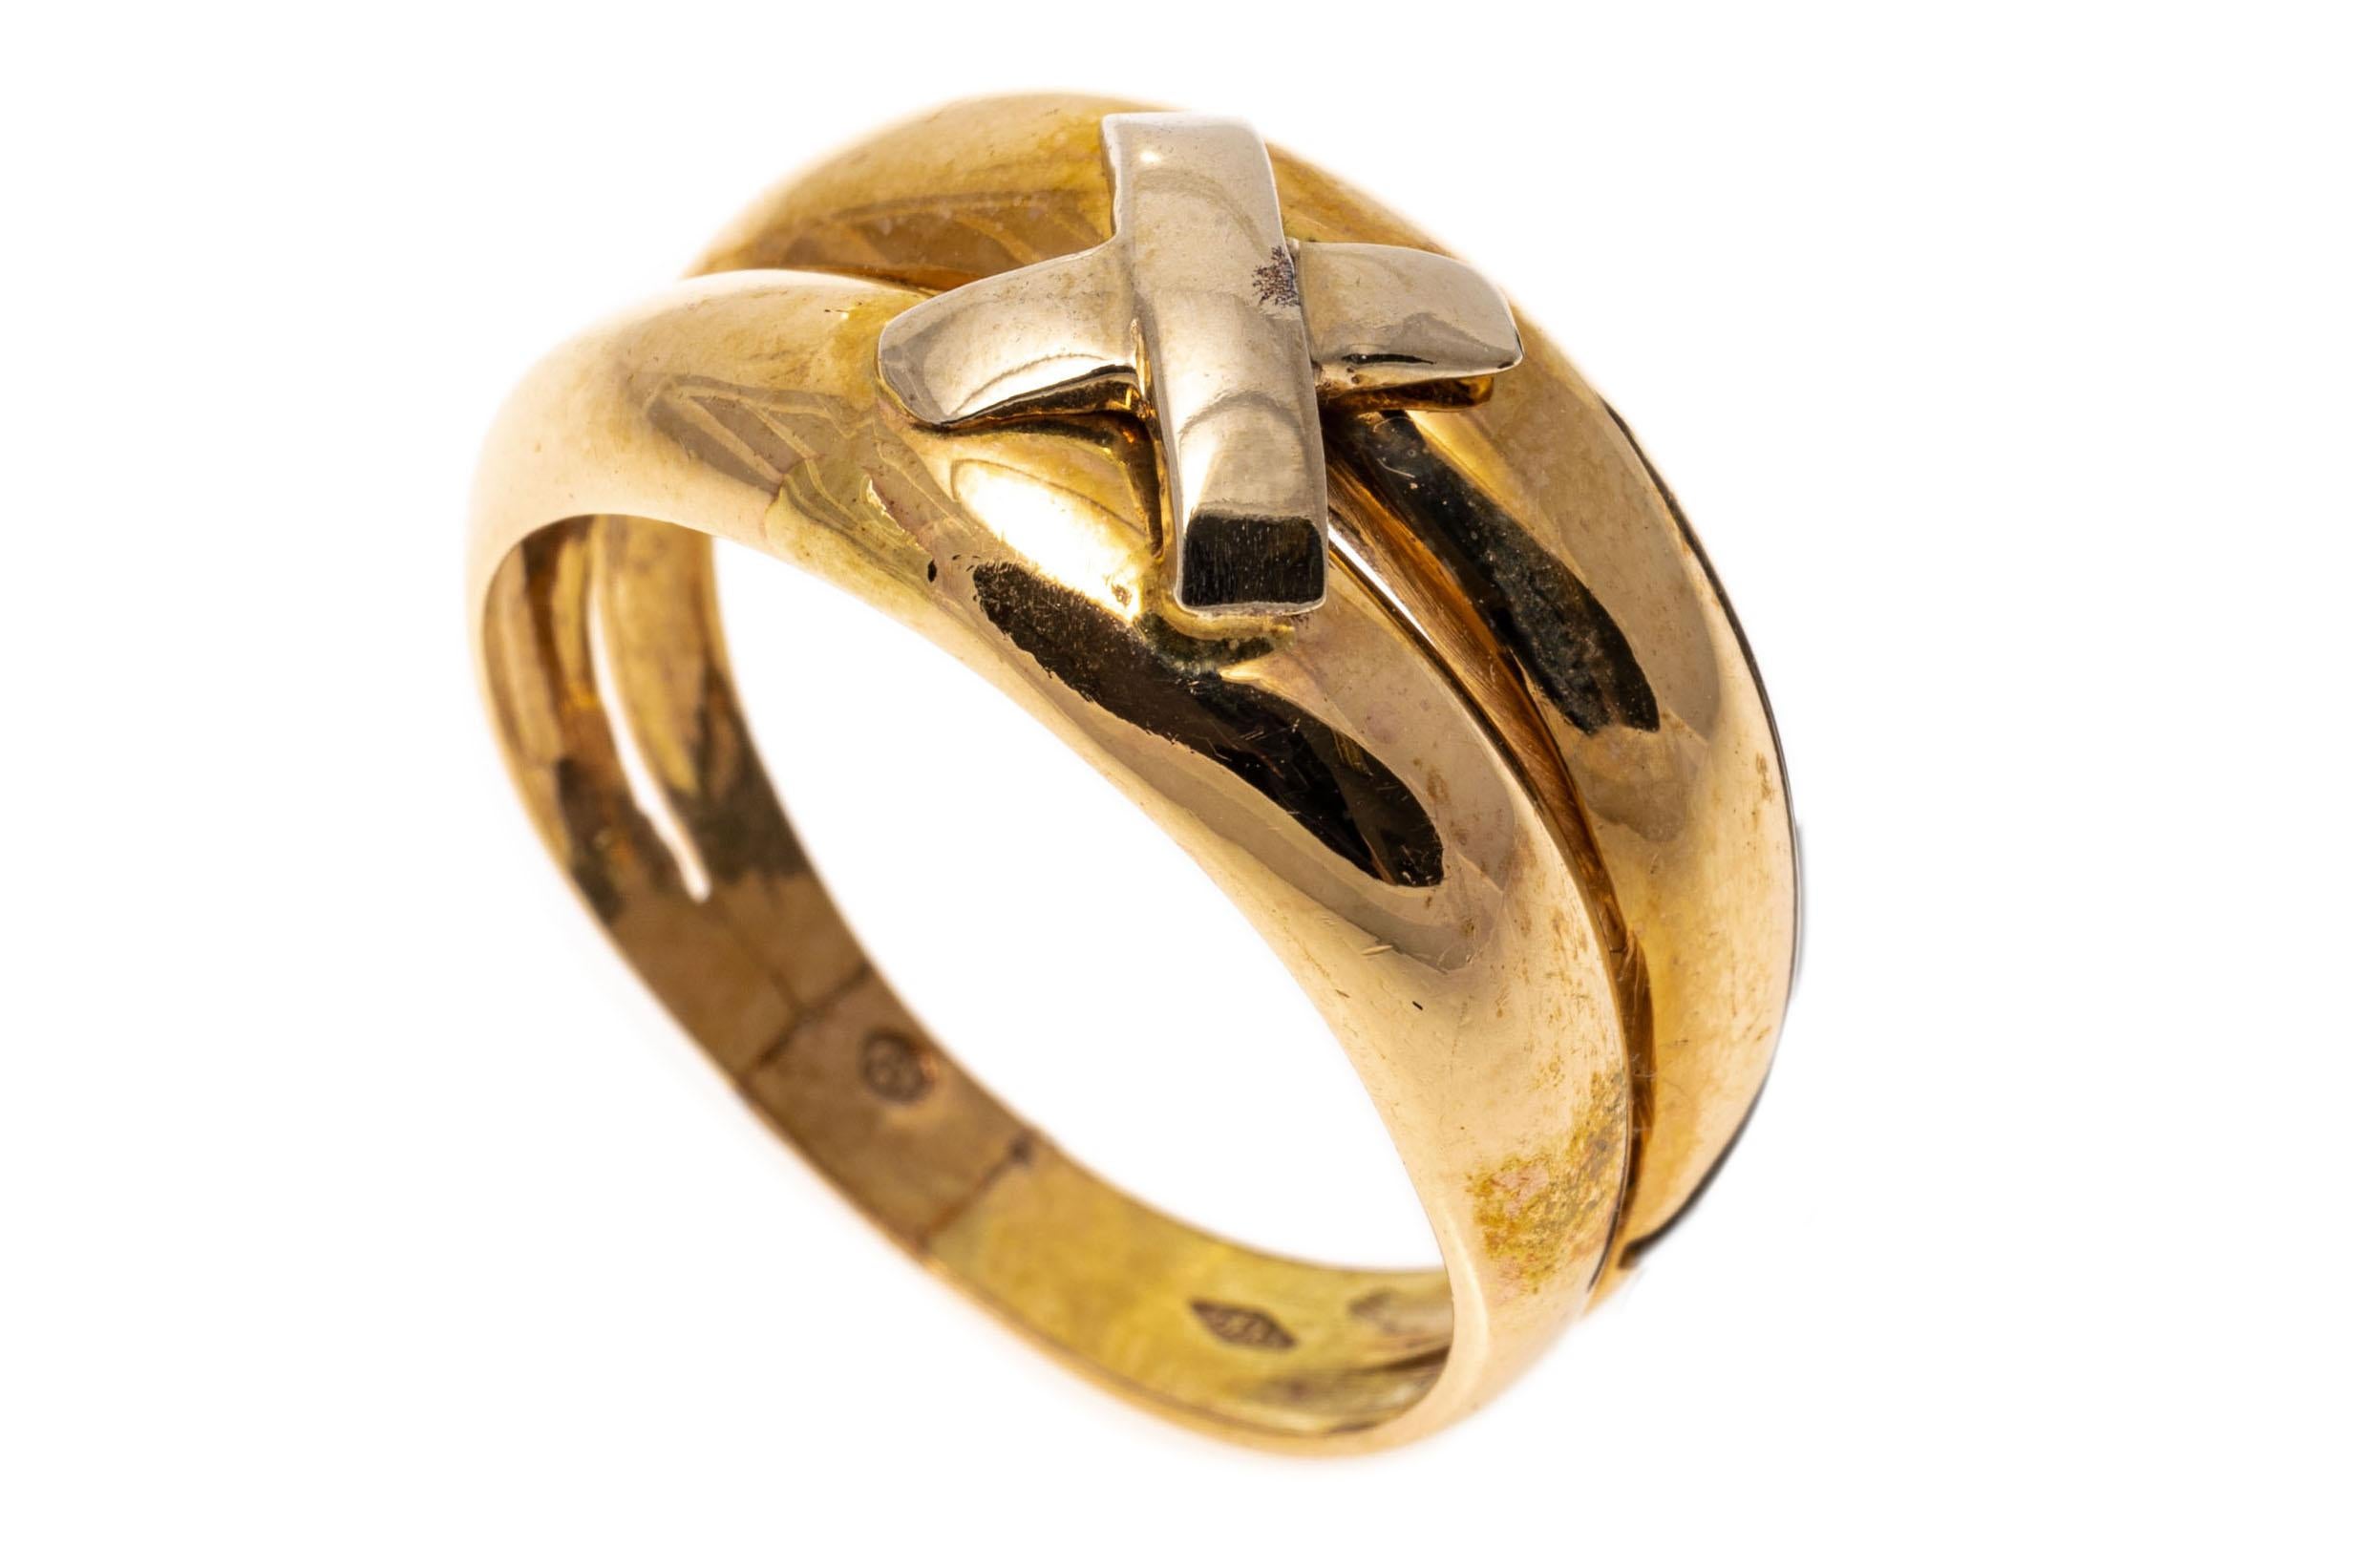 14k yellow gold ring. This classic yellow gold dome ring is a high polished, wide split rib, with a center decorative 